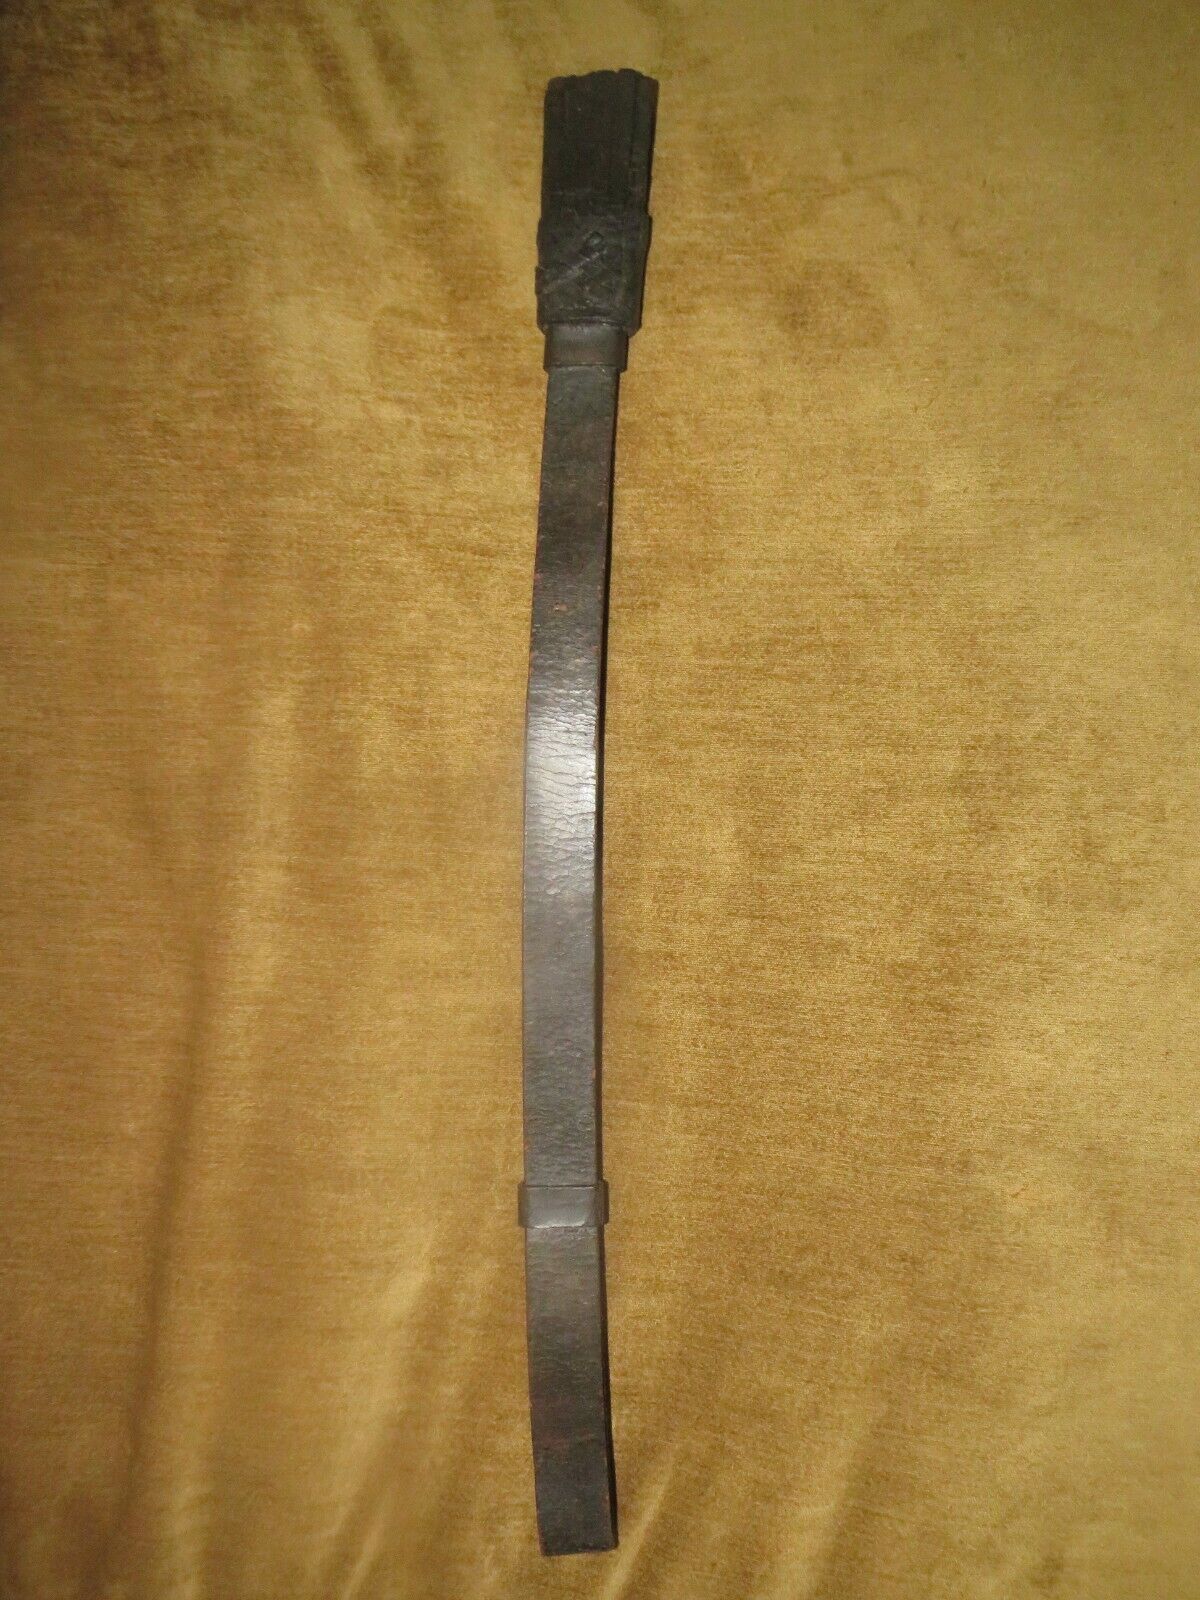 ANTIQUE U.S. CIVIL WAR ORIGINAL LEATHER CAVALRY SWORD / SABER KNOT BY E. GAYLORD